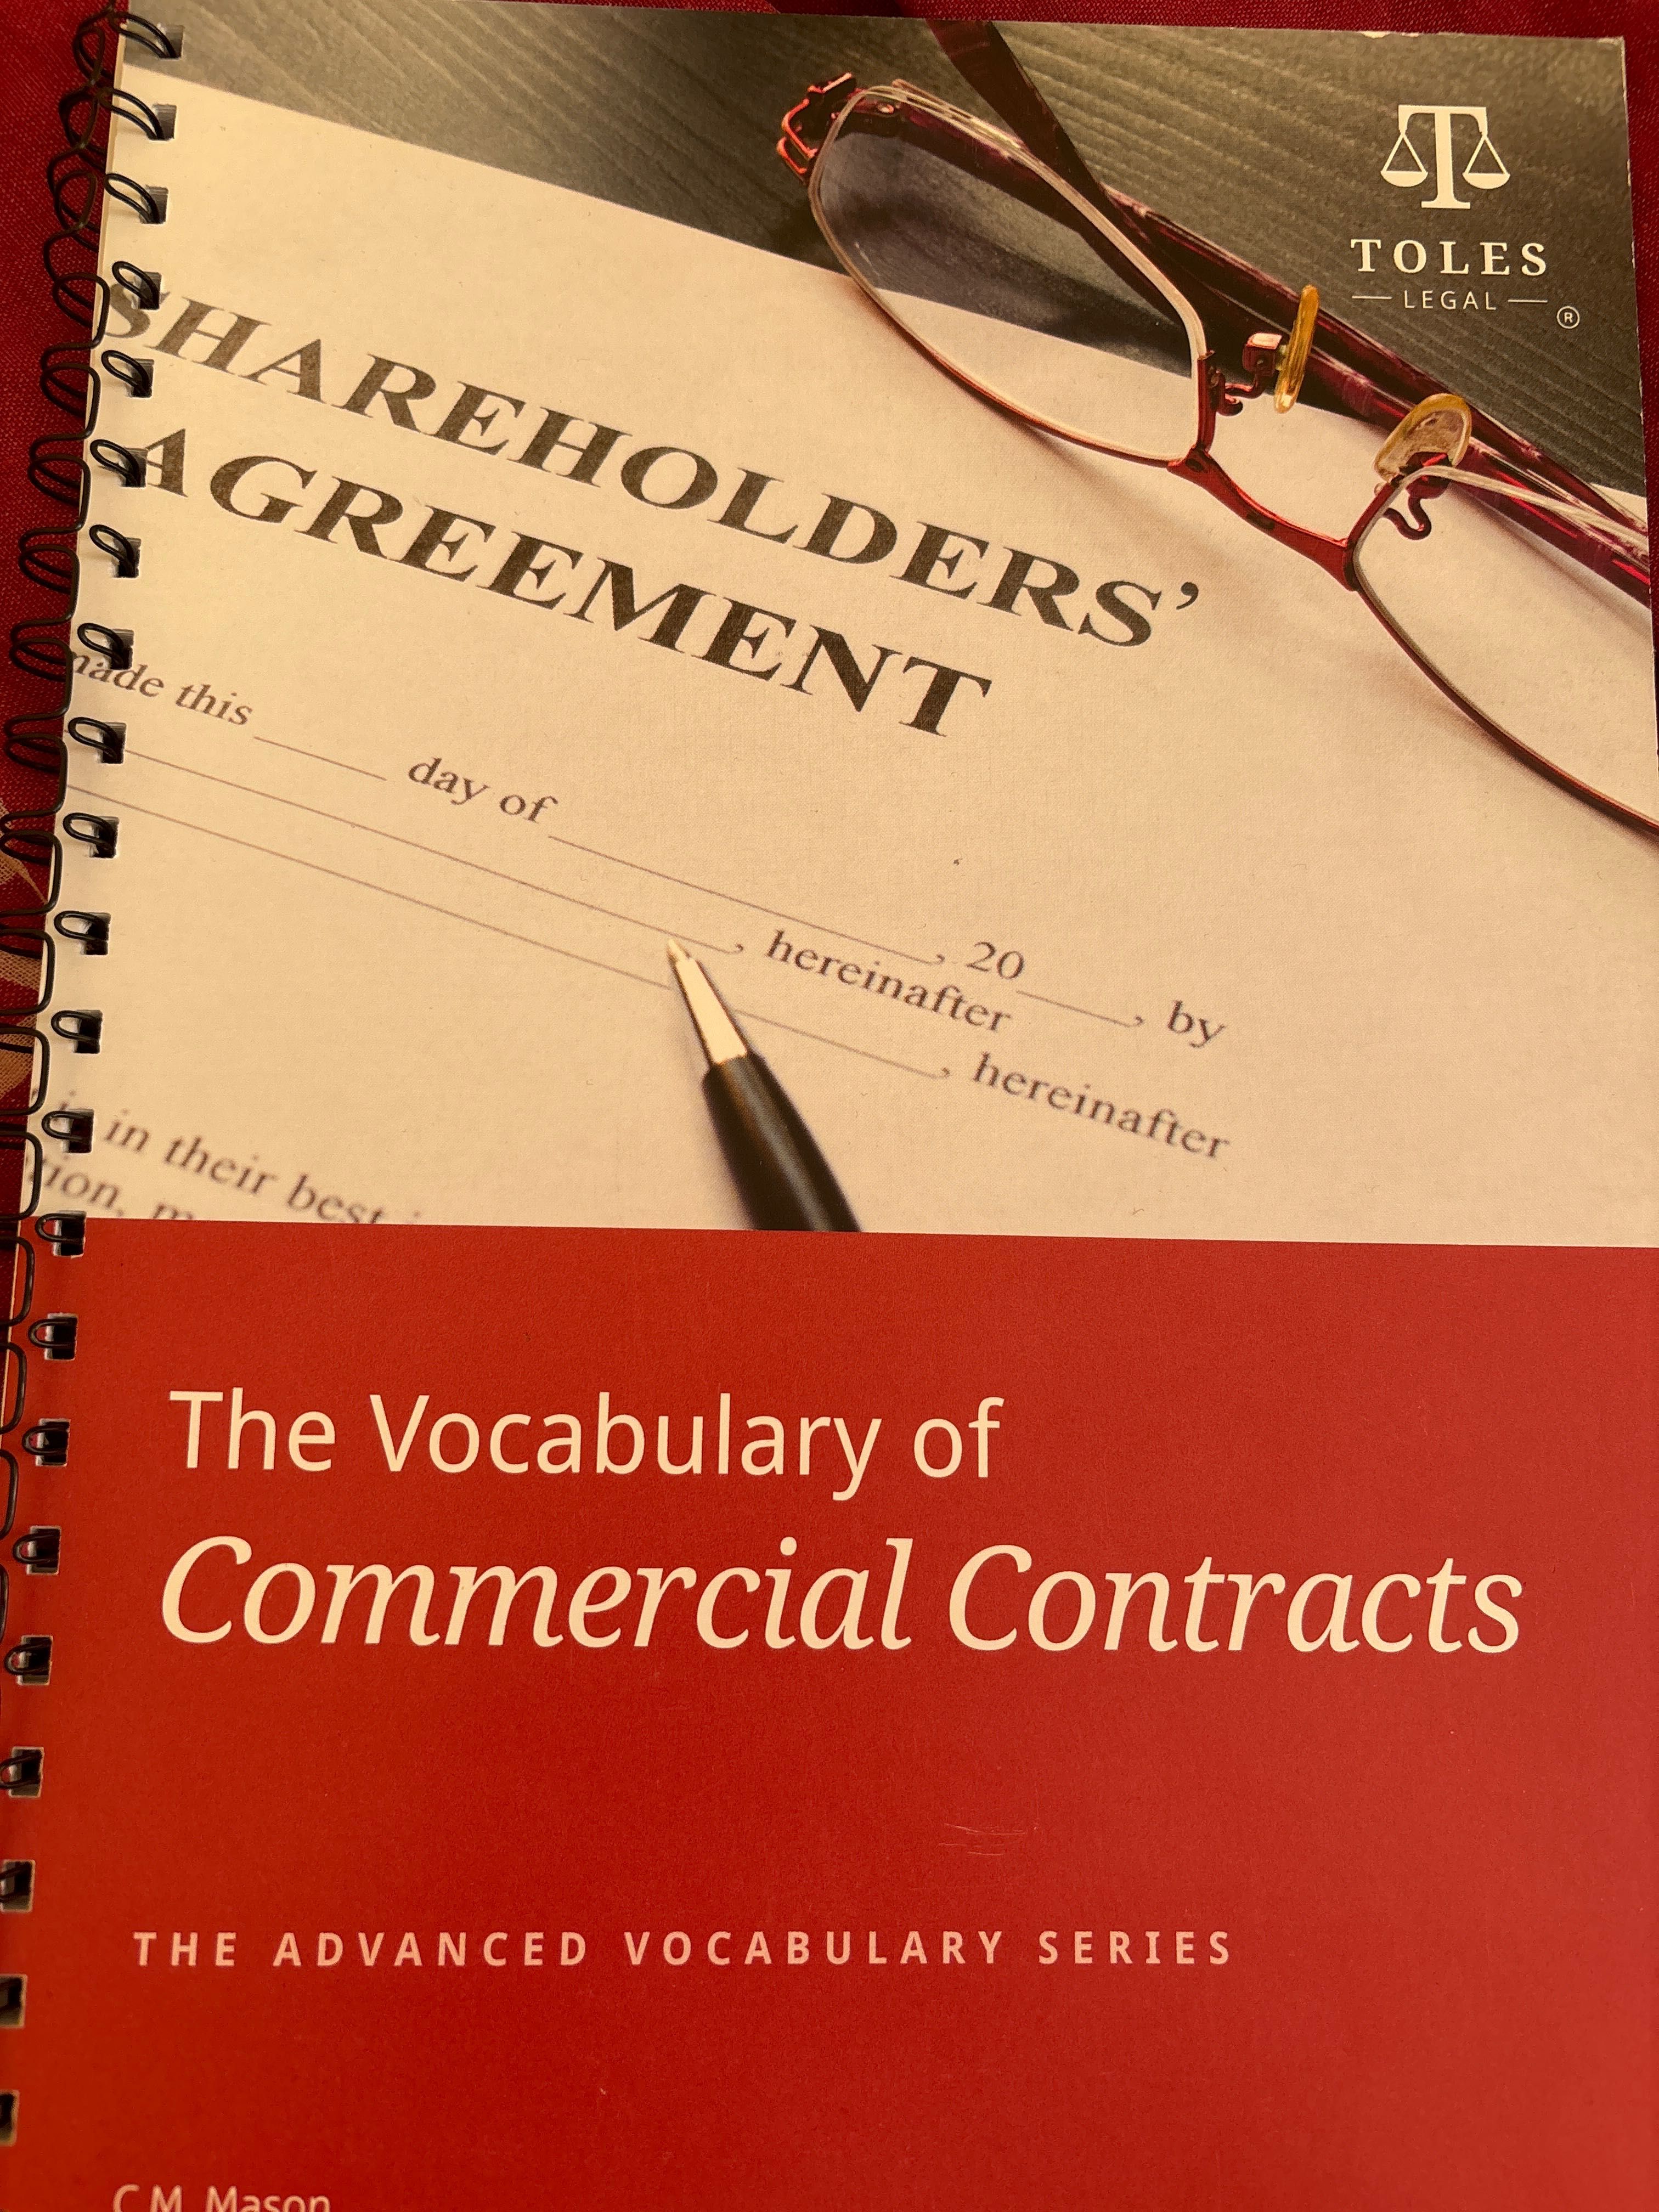 Vocabulary of commercial contracts